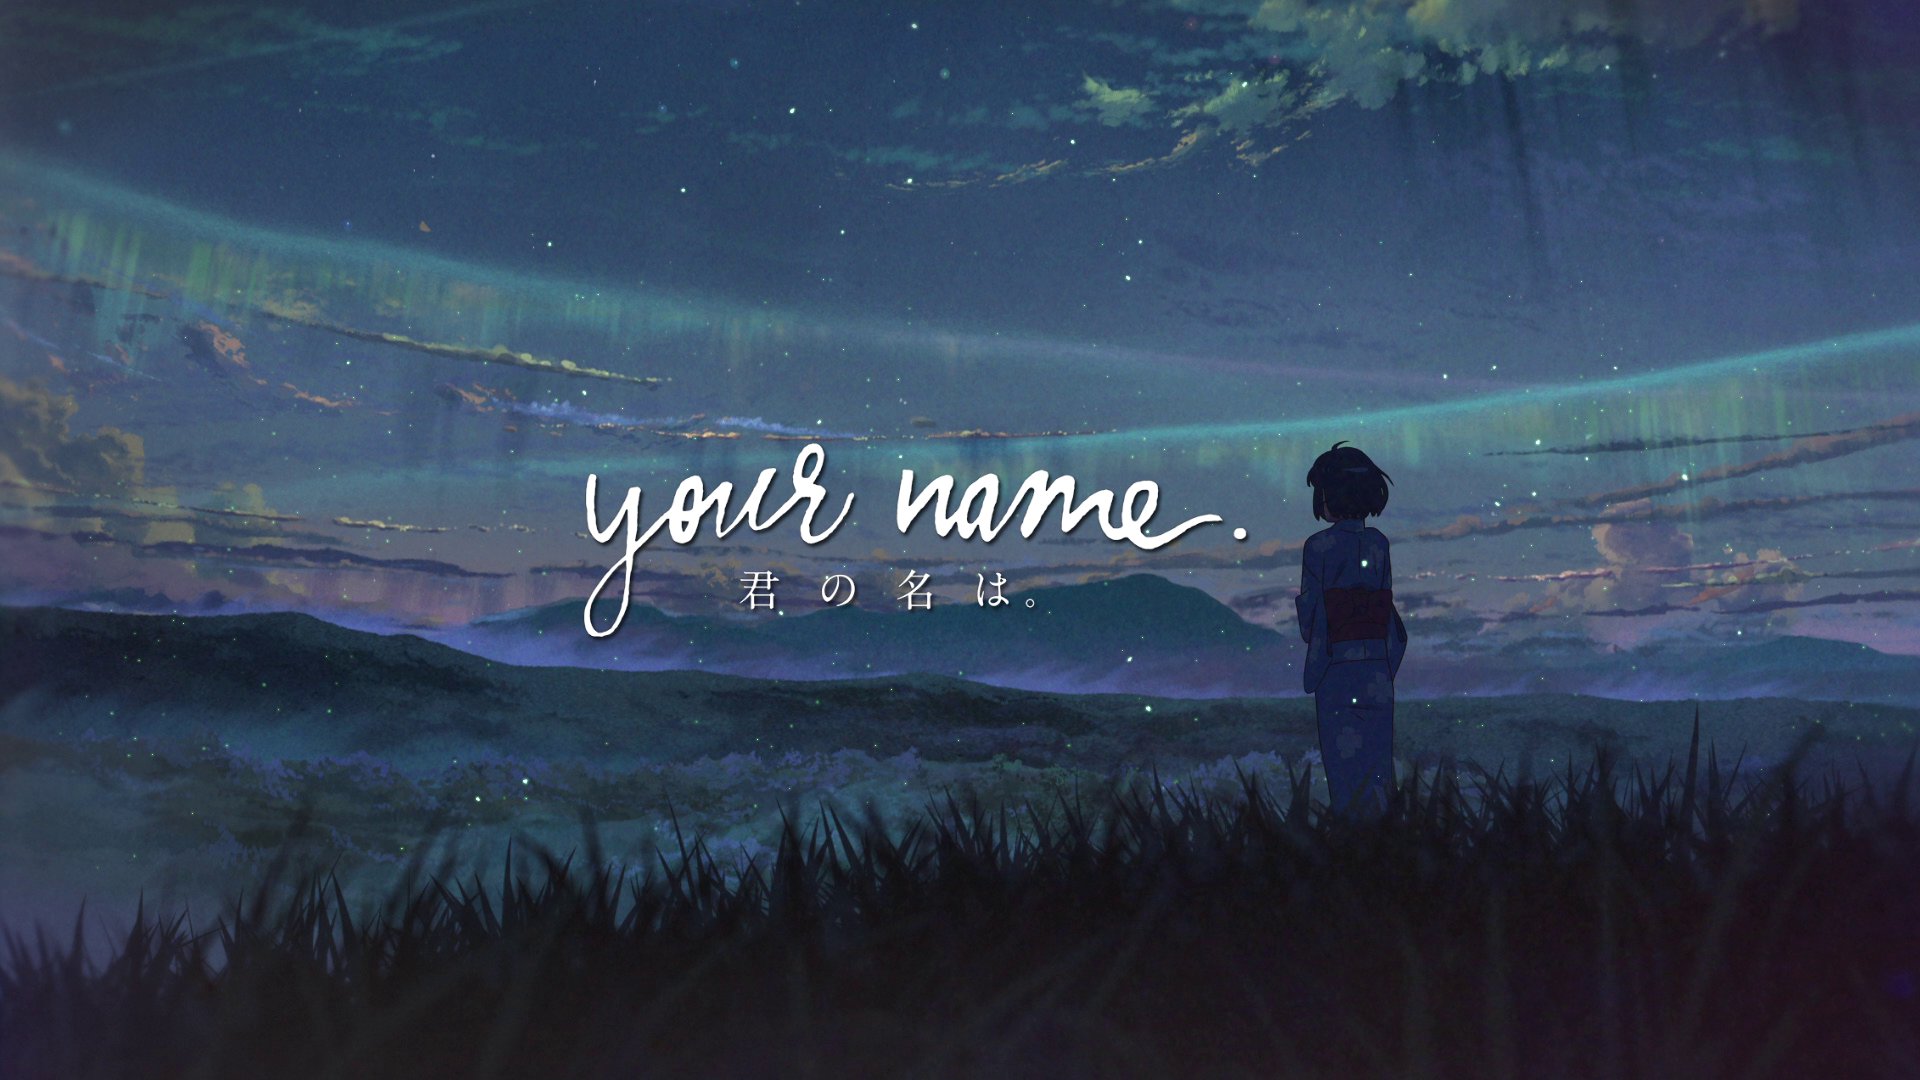 Your Name Wallpaper Hd Wallpaper Background Image 1920x1080